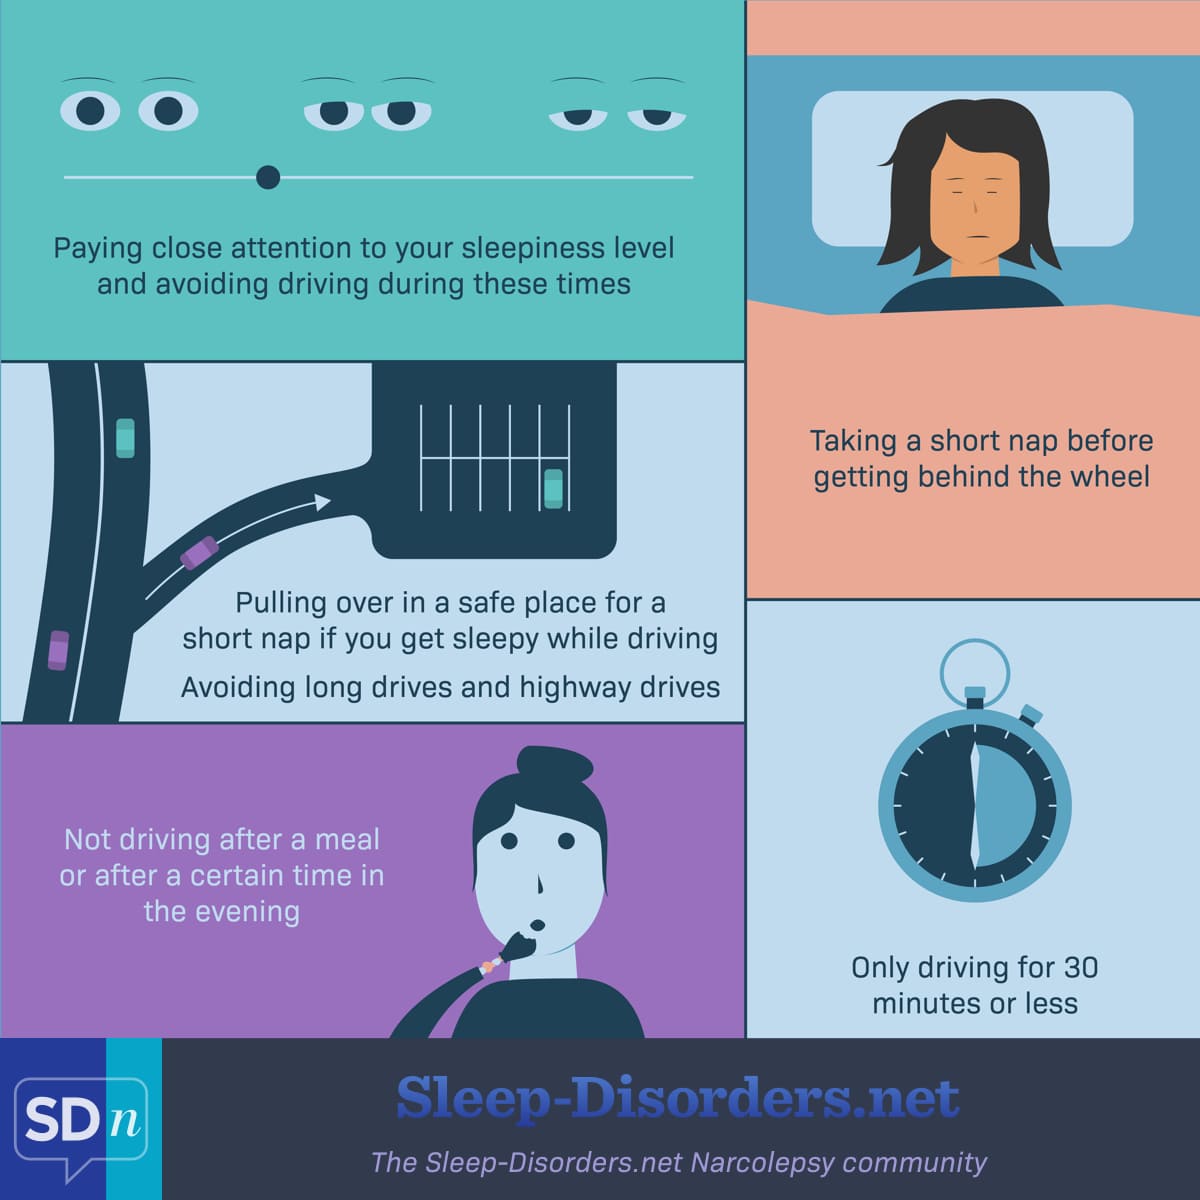 Tips to help prevent drowsy driving for those with Narcolepsy